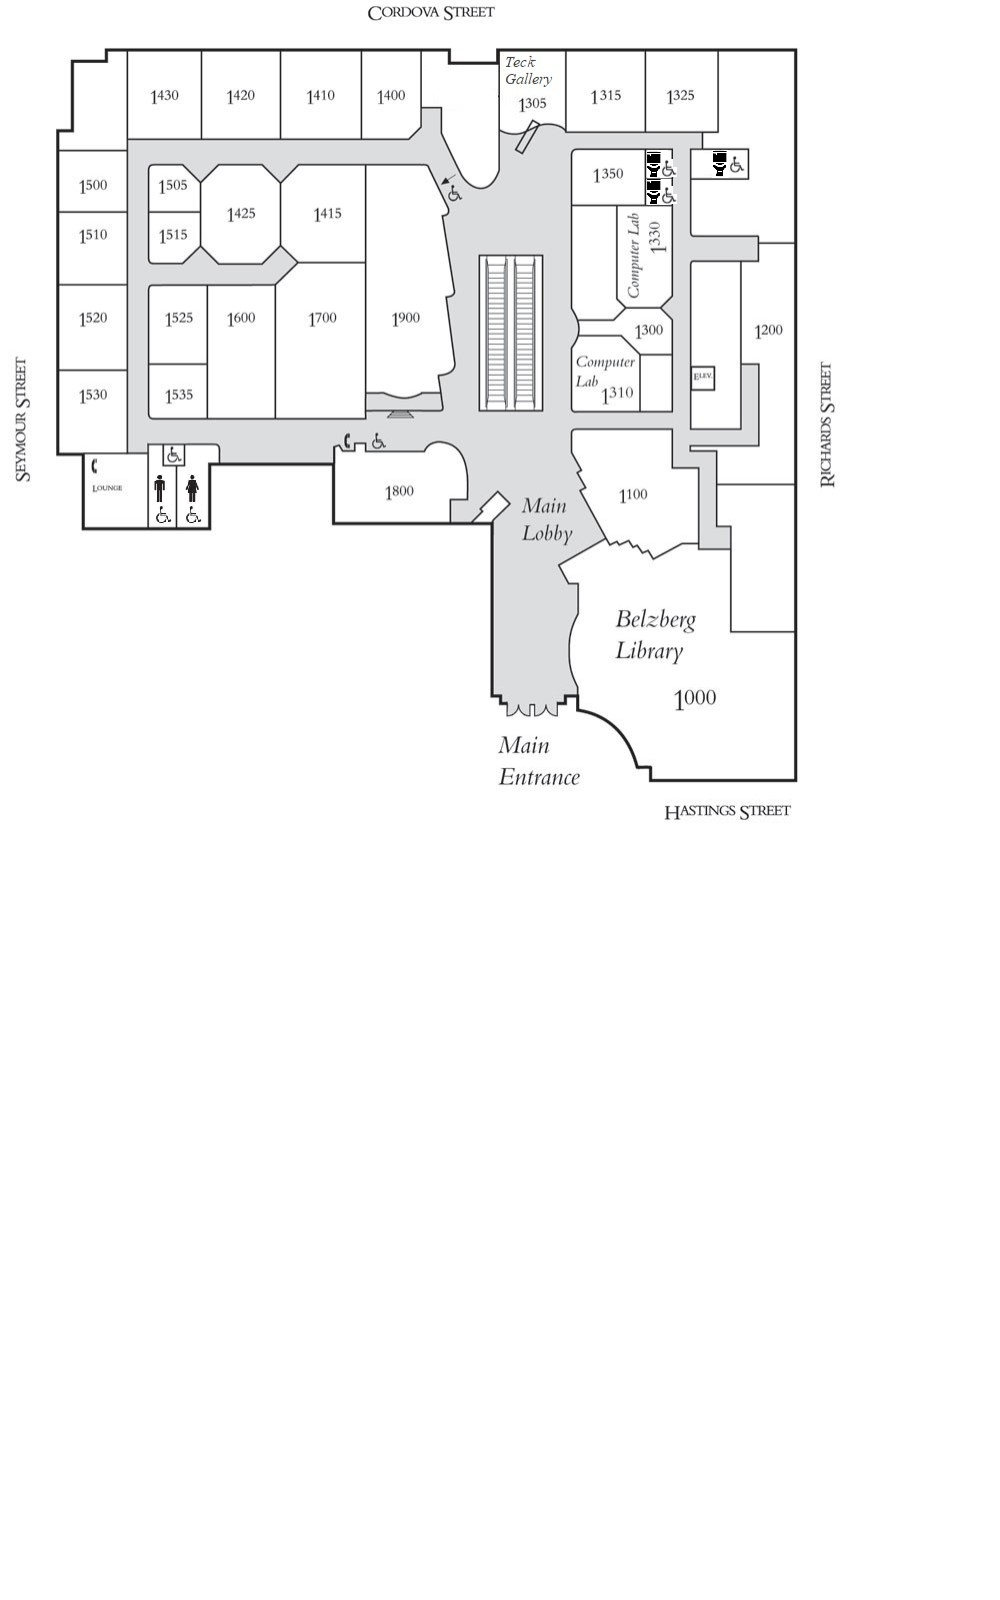 Floor Plans Meeting, Event and Conference Services